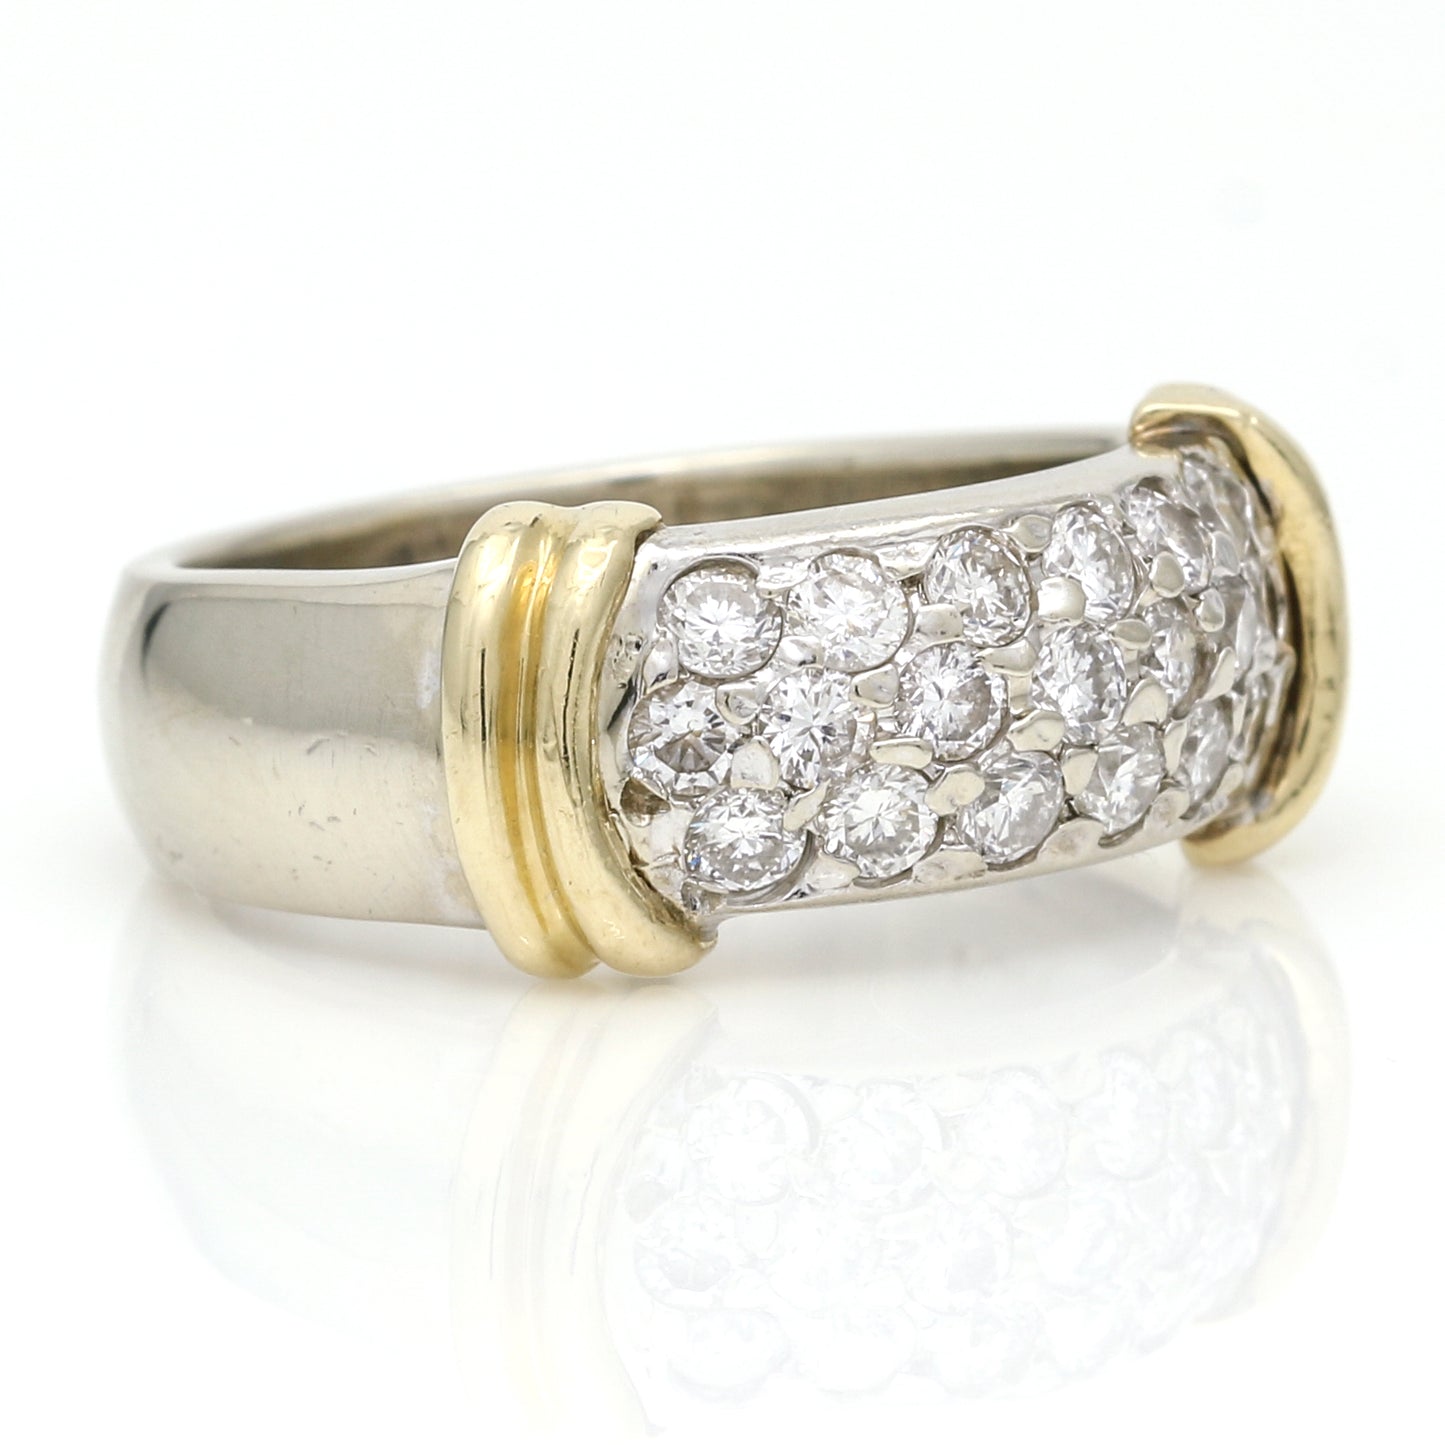 Women's Pave Diamond Band Ring in 14k White and Yellow Gold